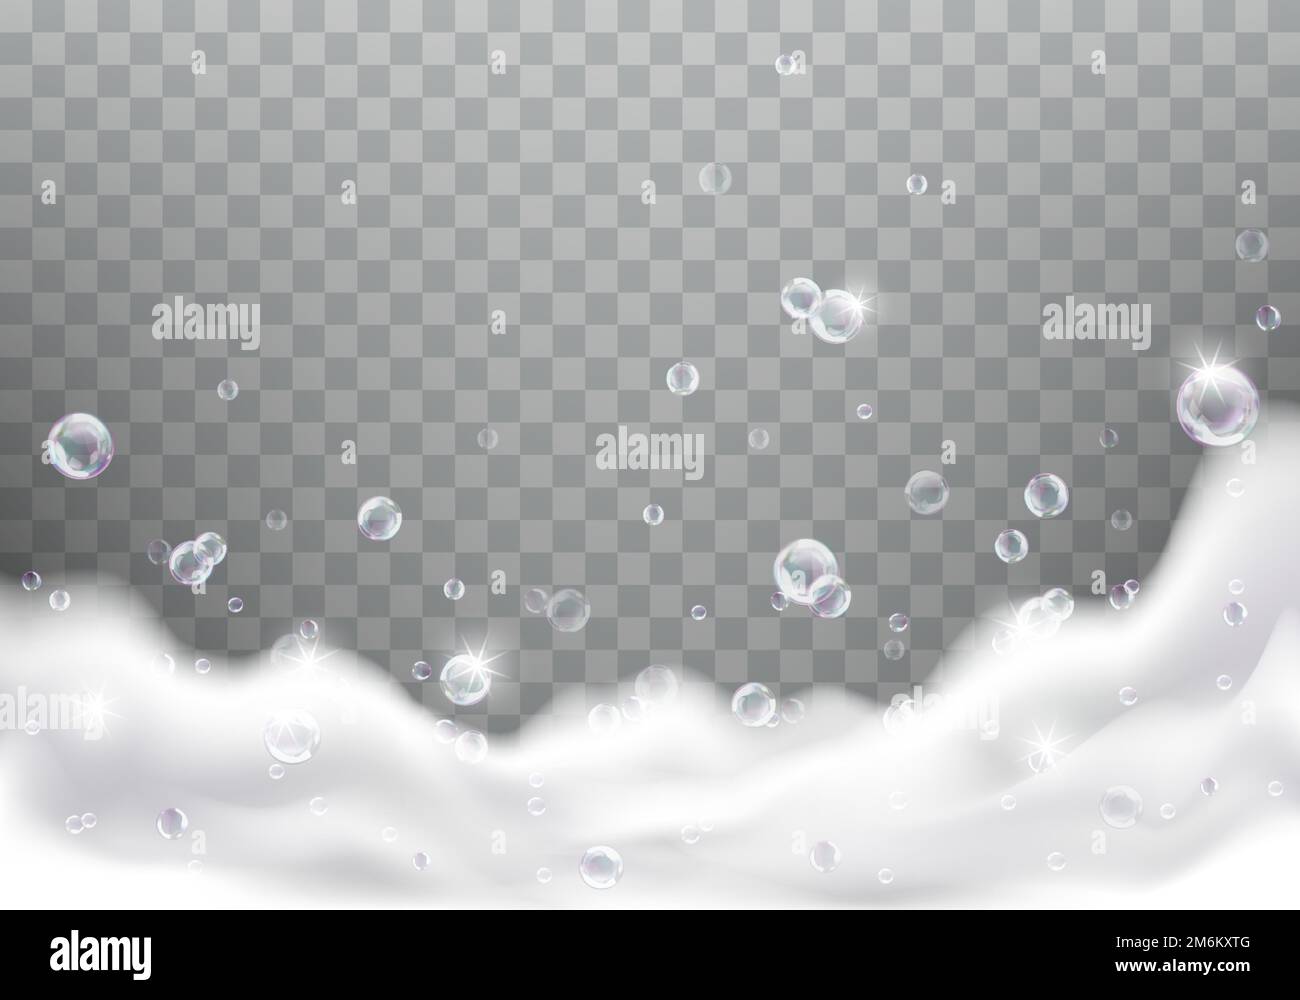 Bath foam realistic vector illustration on transparent background. White soap suds with rainbow air bubbles, shampoo bubbles or foaming detergent texture, frame or border for design Stock Vector